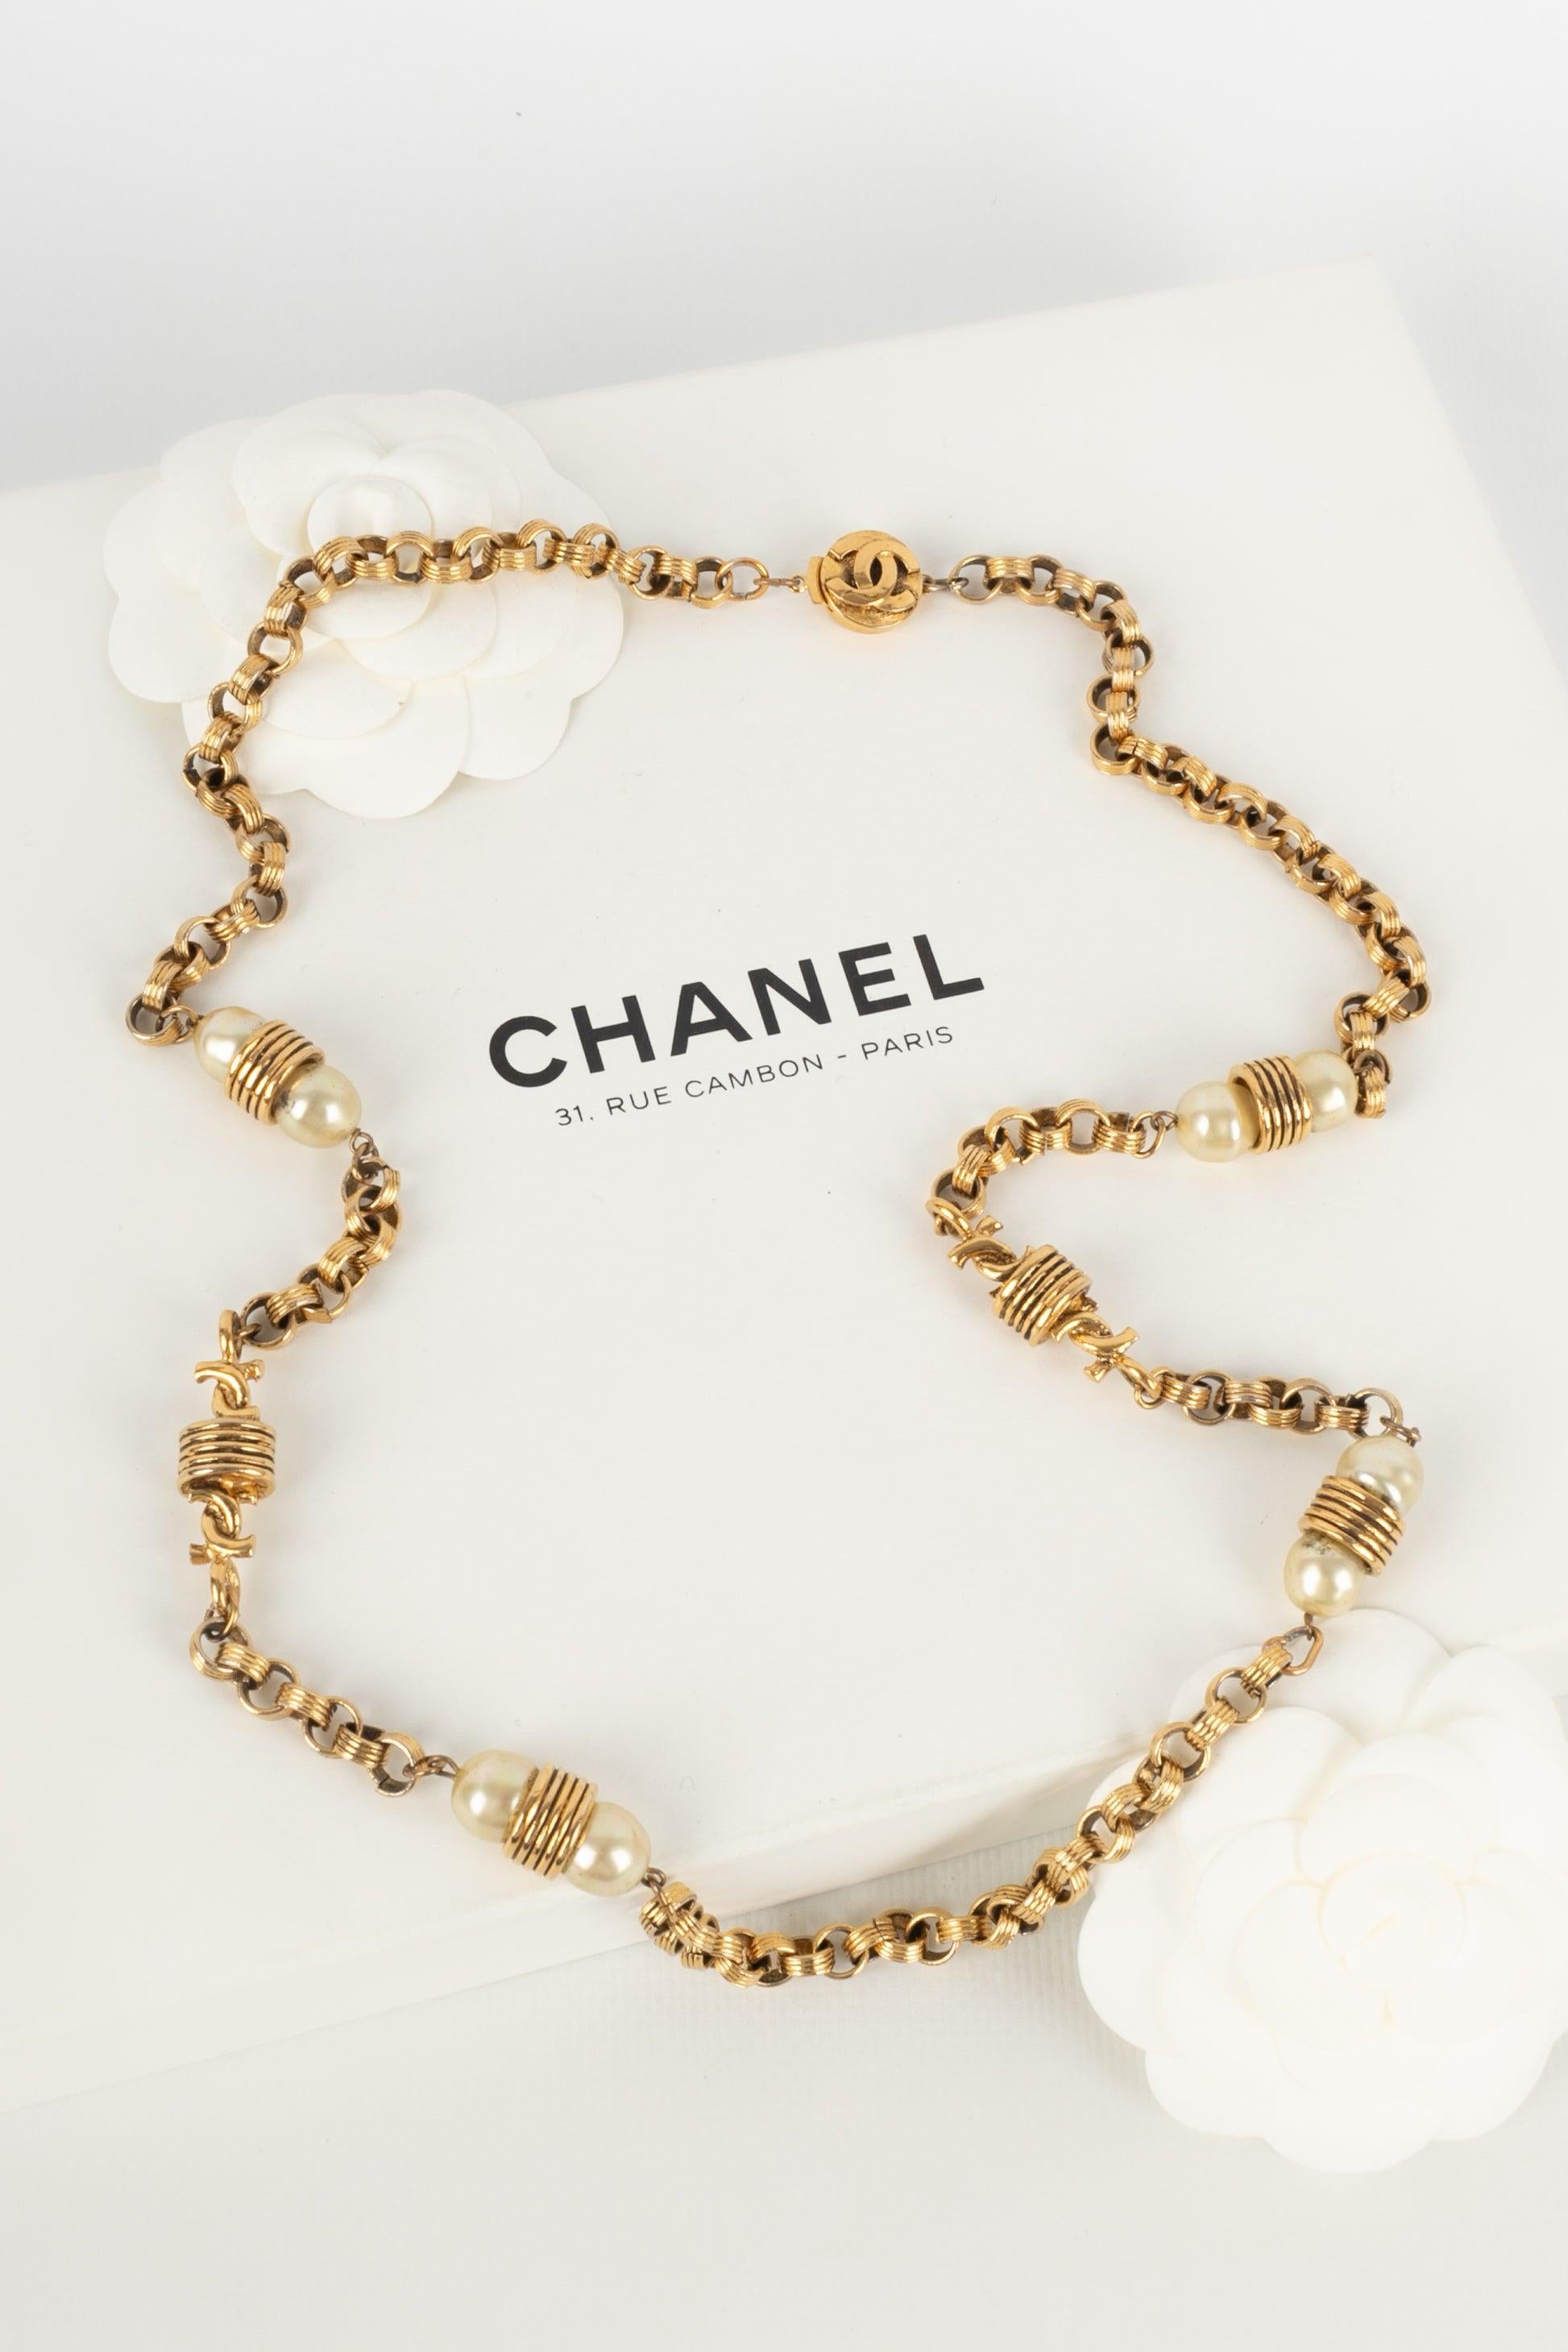 Chanel - Golden metal necklace with costume pearls. Jewelry from the 1980s.

Additional information:
Condition: Good condition
Dimensions: Length: 80 cm

Seller reference: CB55